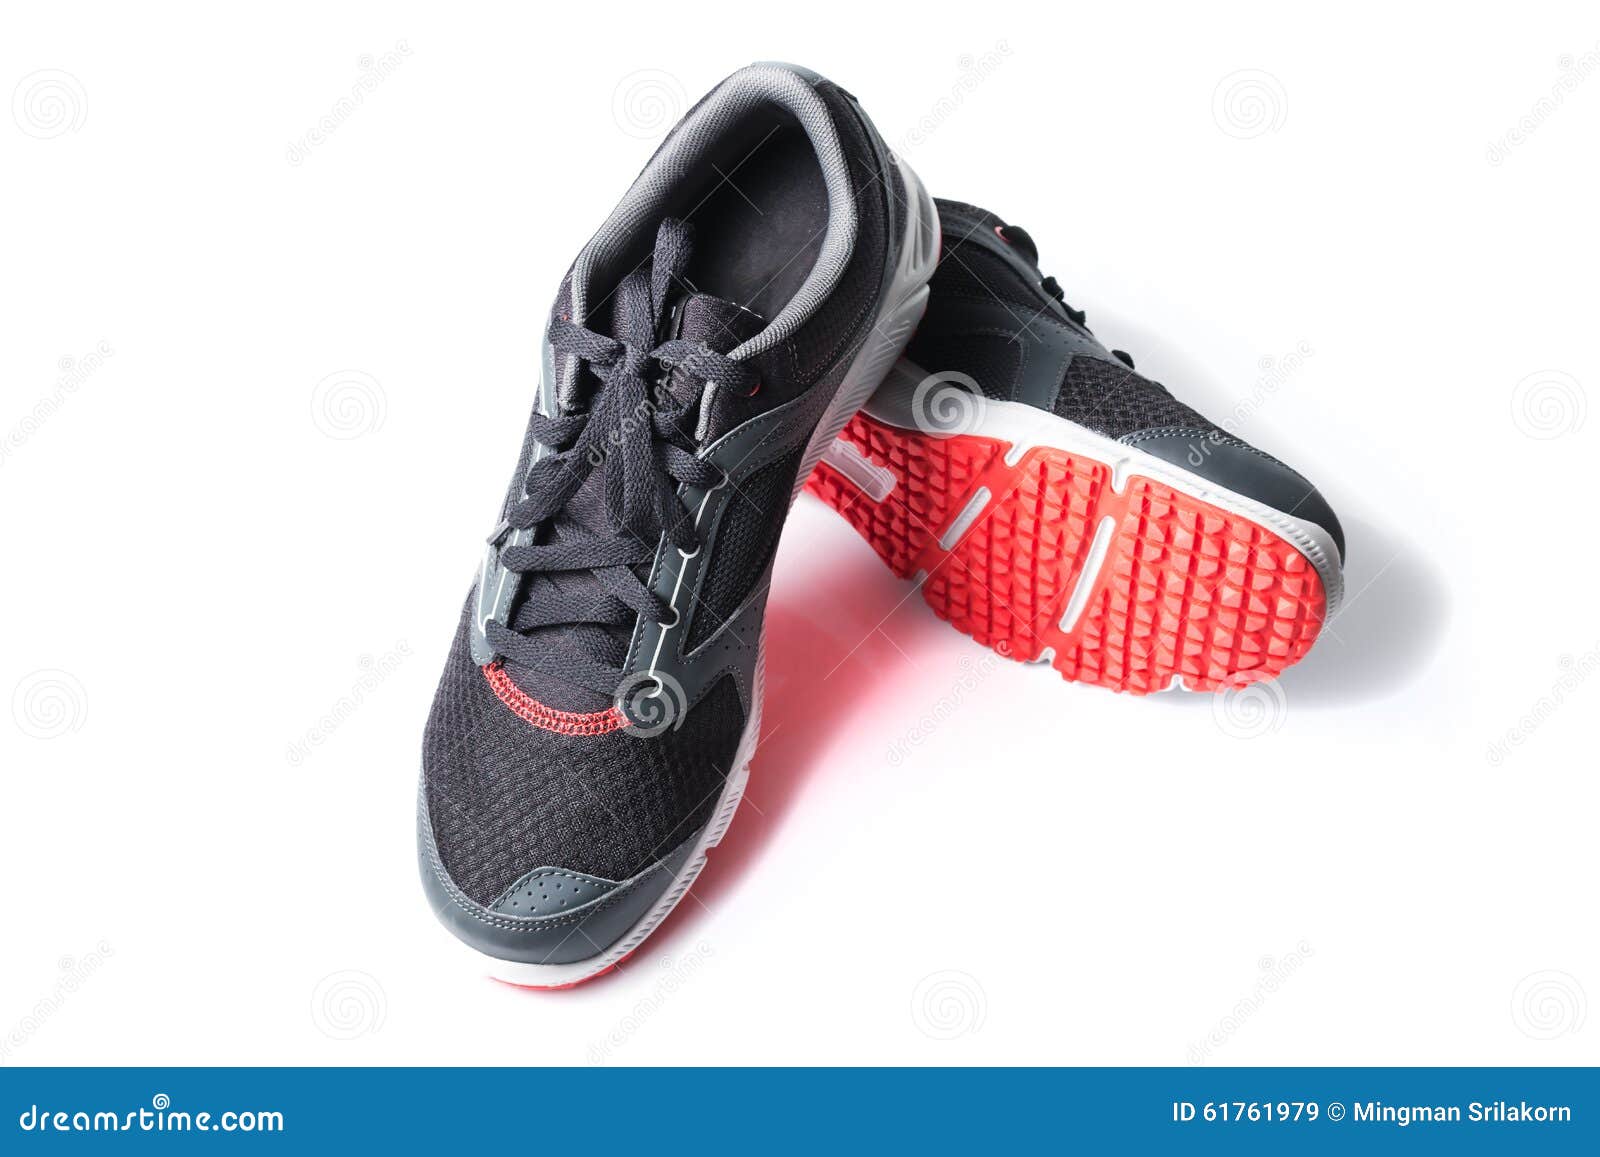 New Unbranded Running Shoe Color Black And Red Stock Image - Image of ...